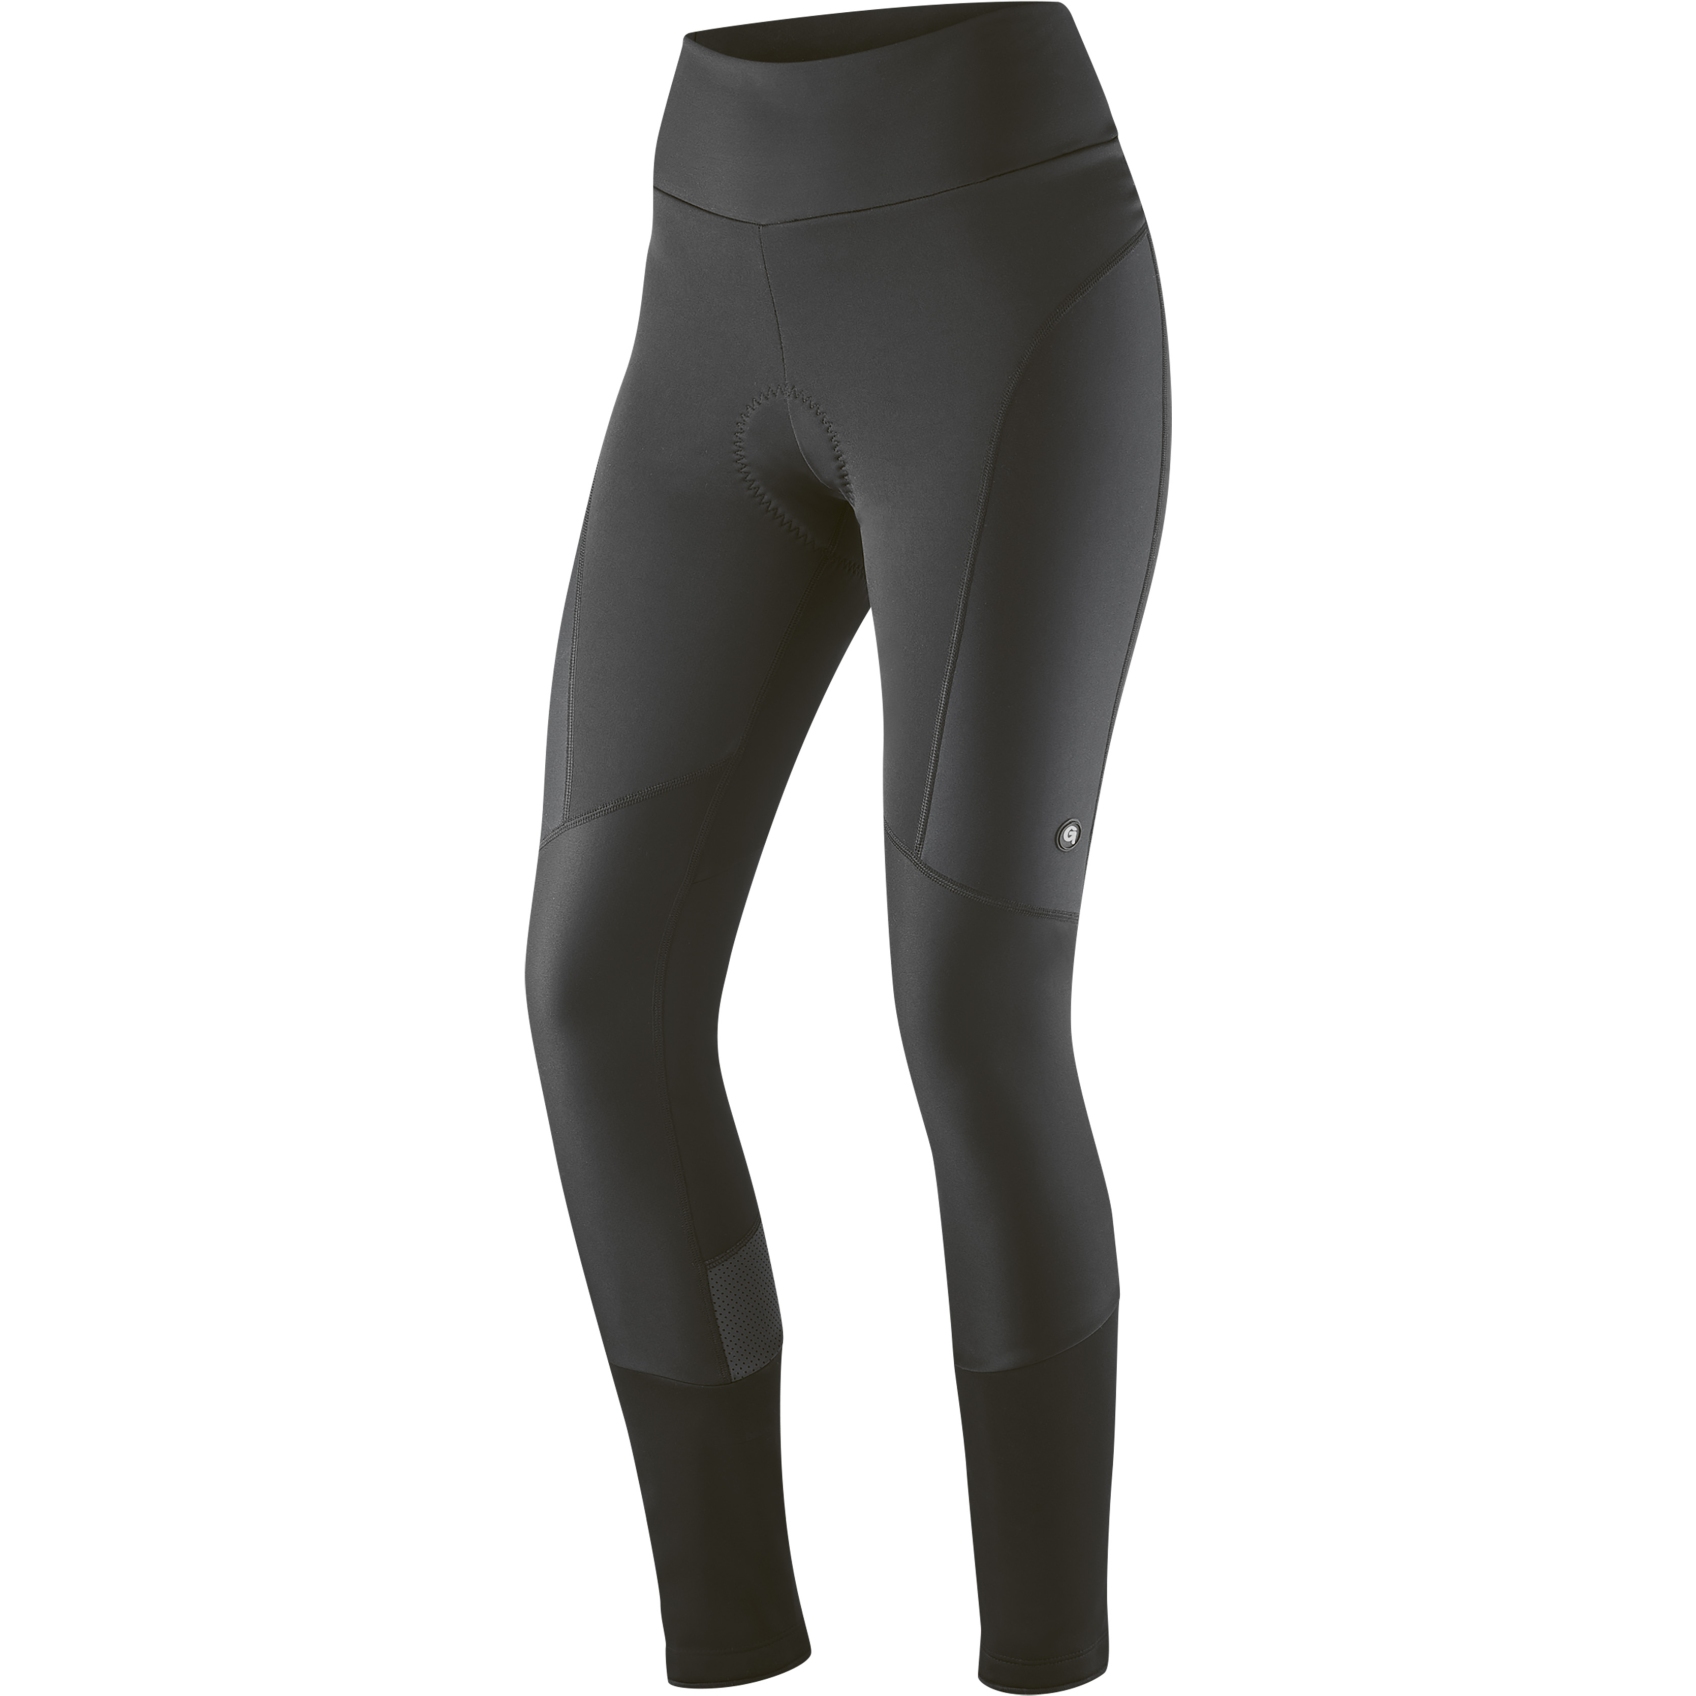 Picture of Gonso Tartu 2 Softshell Cycling Tights Women - Black